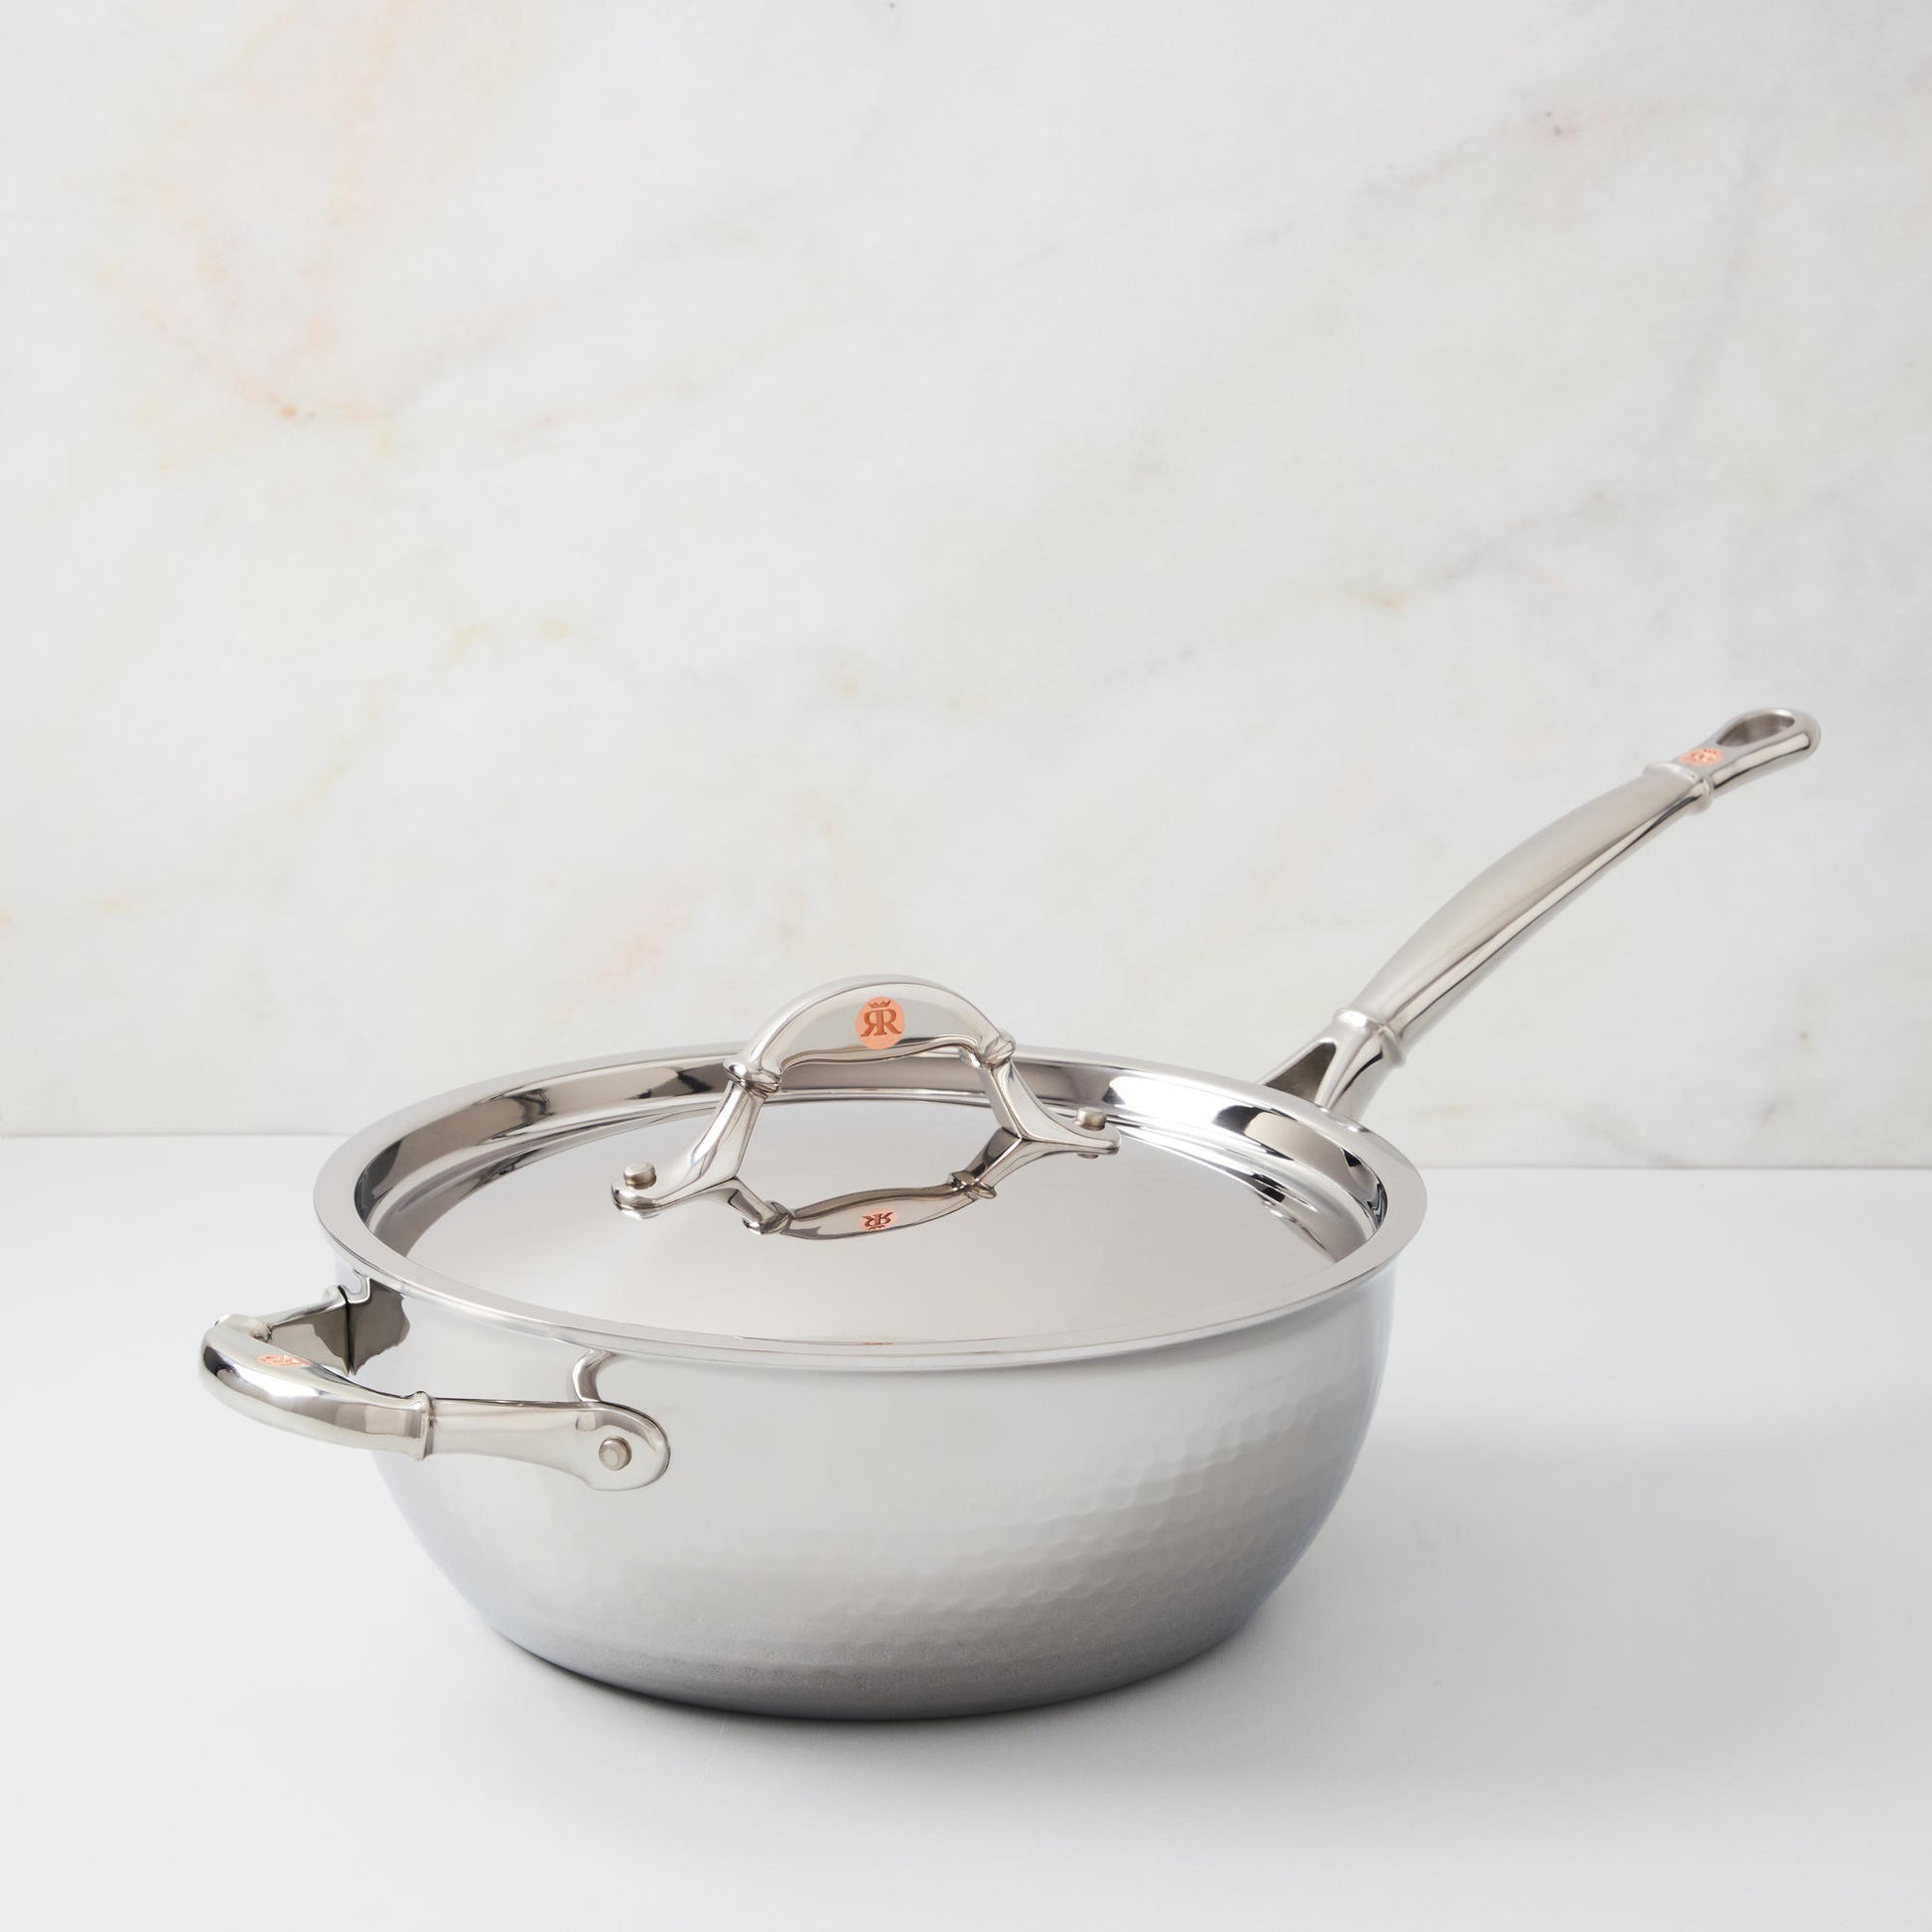  Hammered clad stainless steel chef's pan with lid from Ruffoni